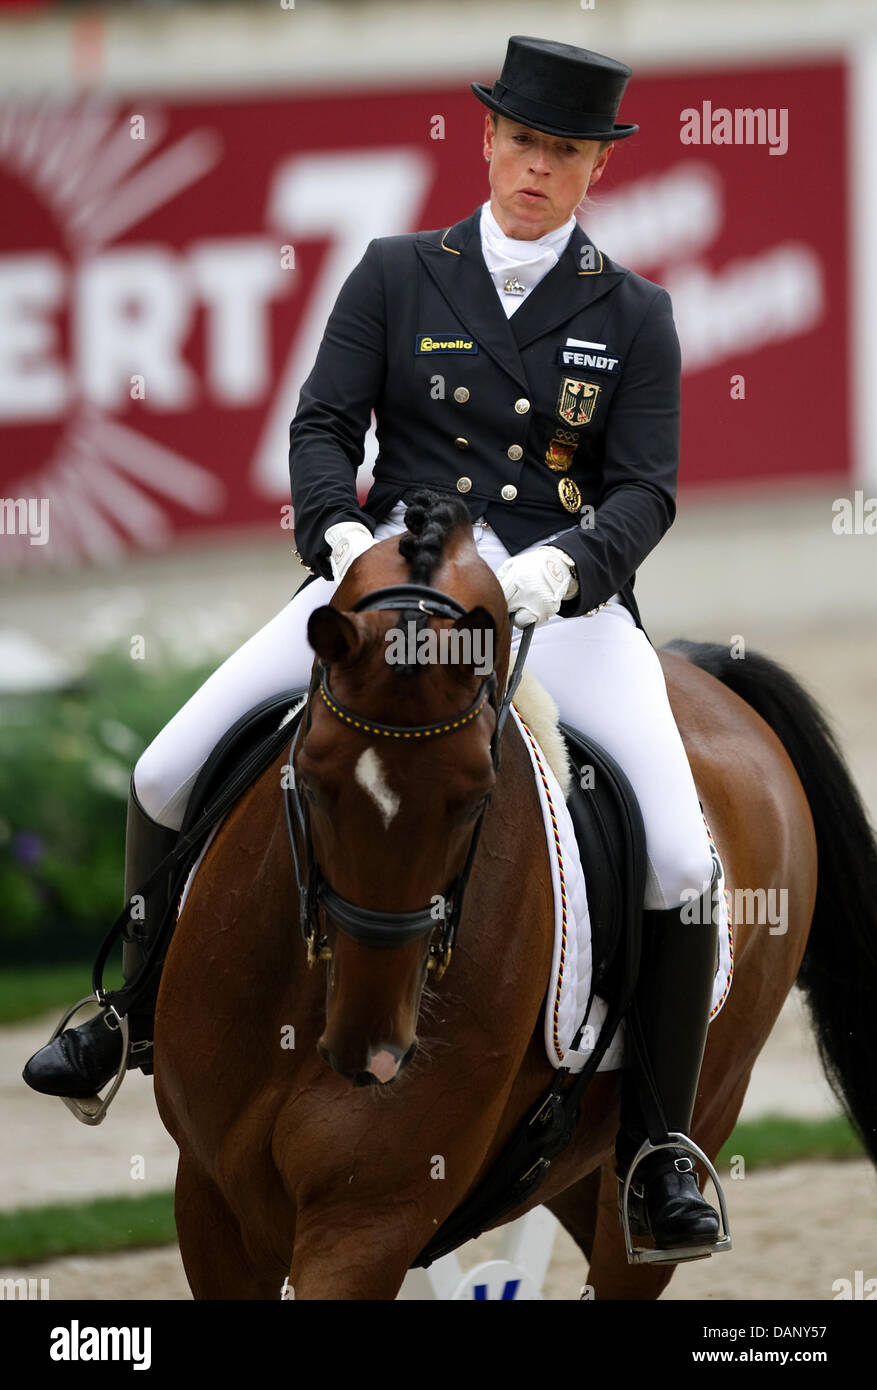 German Isabell Werth rides El Santo during the dressage riding at the CHIO in Aachen, Germany, 14 July 2011. Isabell Werth finished third. The 'World Equestrian Festival' takes place from 08 to 17 July 2011. Photo: Uwe Anspach Stock Photo